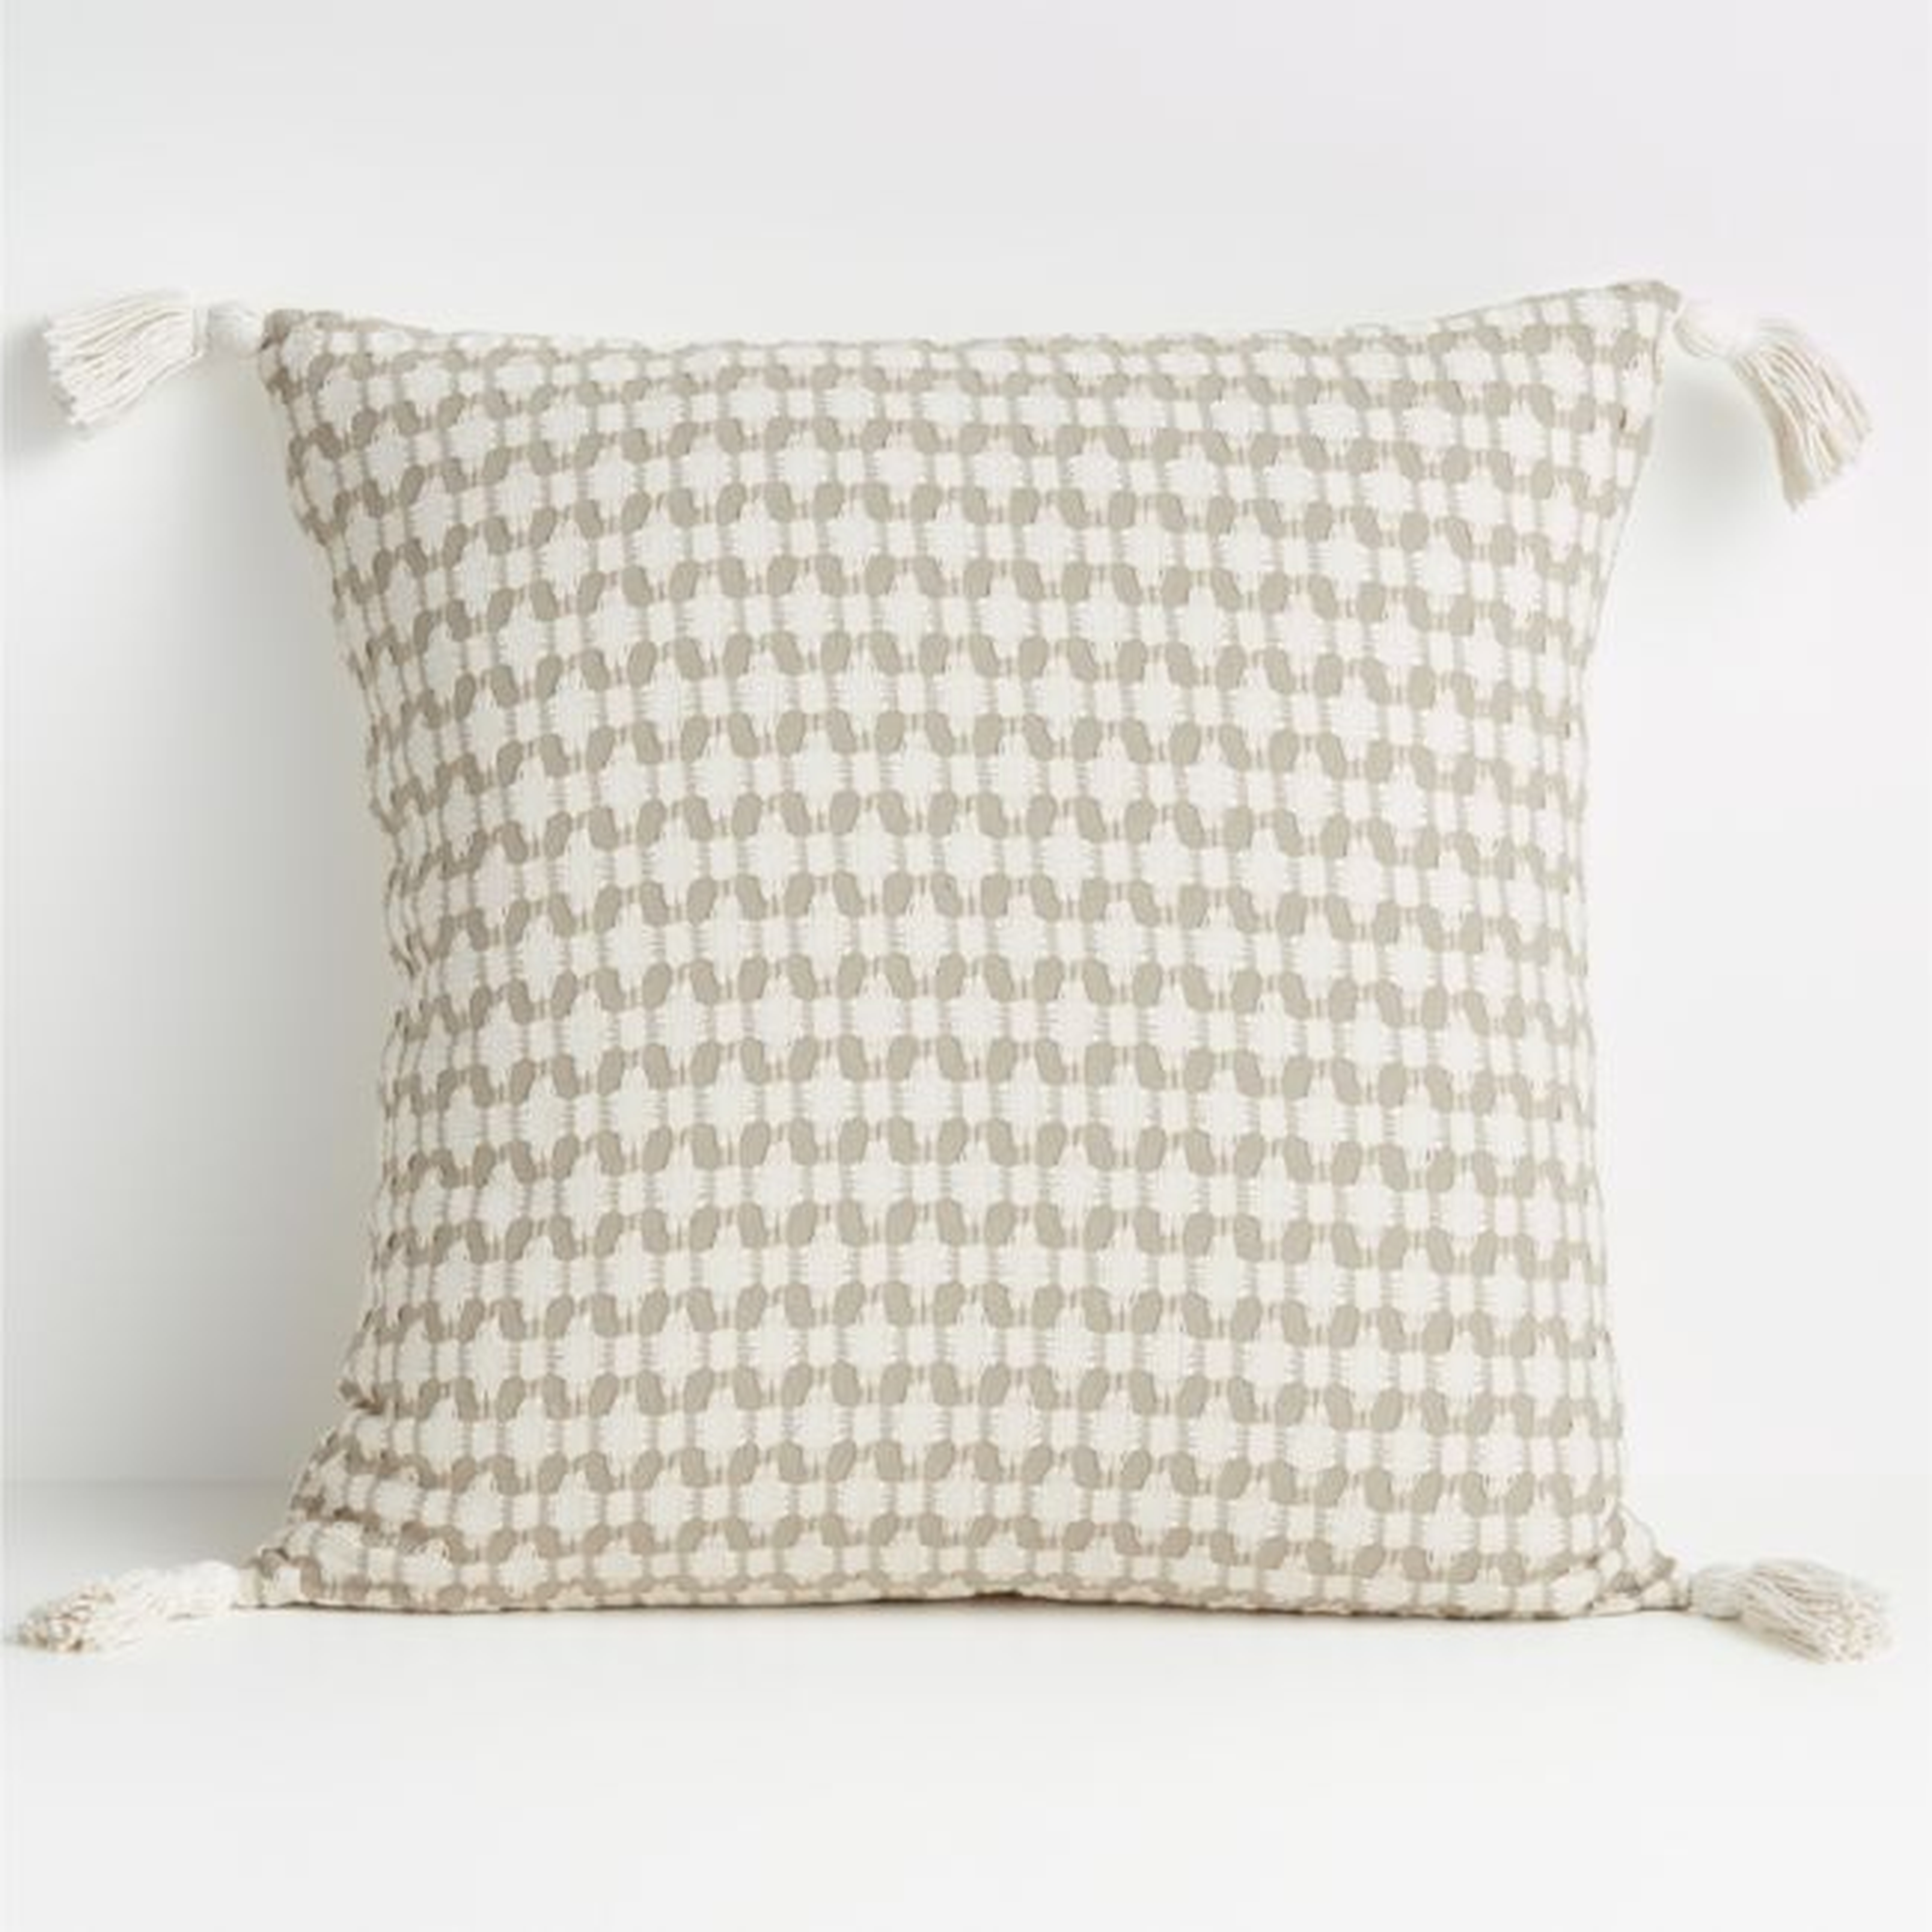 Tahona Textured Pillow with Down-Alternative Insert, White Swan, 23" x 23" - Crate and Barrel